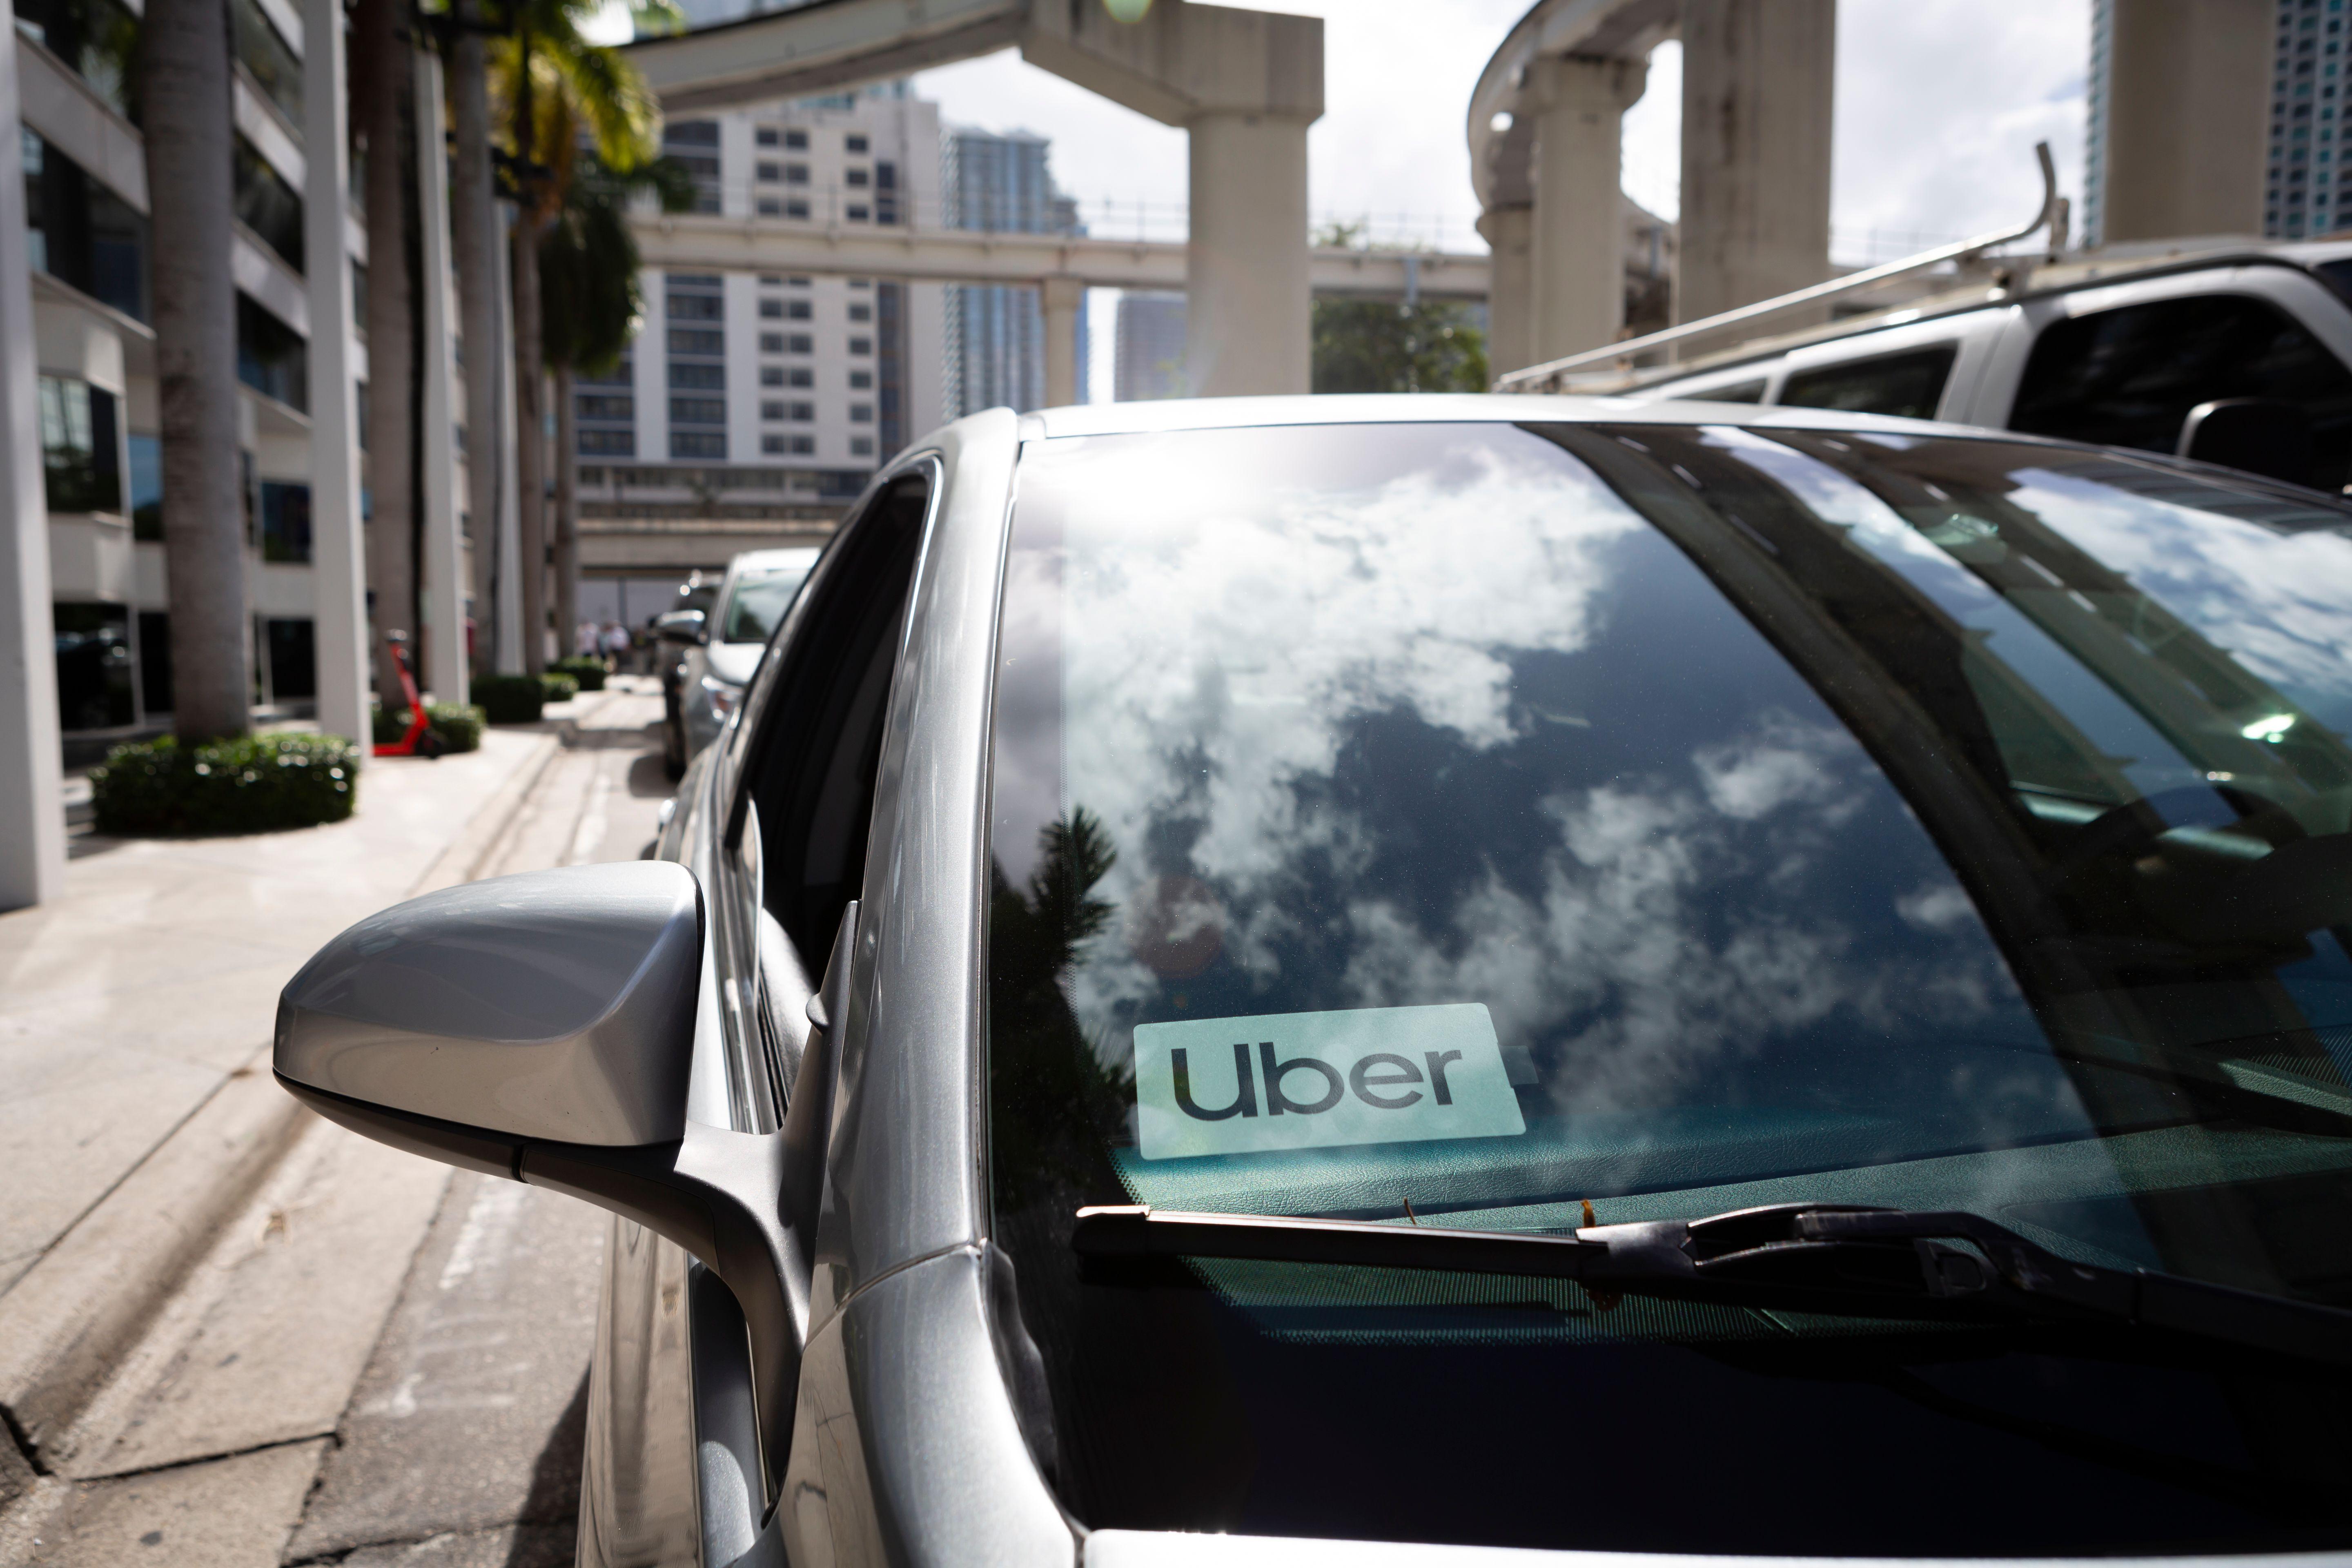 Uber prices will rise to meet the company's newly urgent quest for